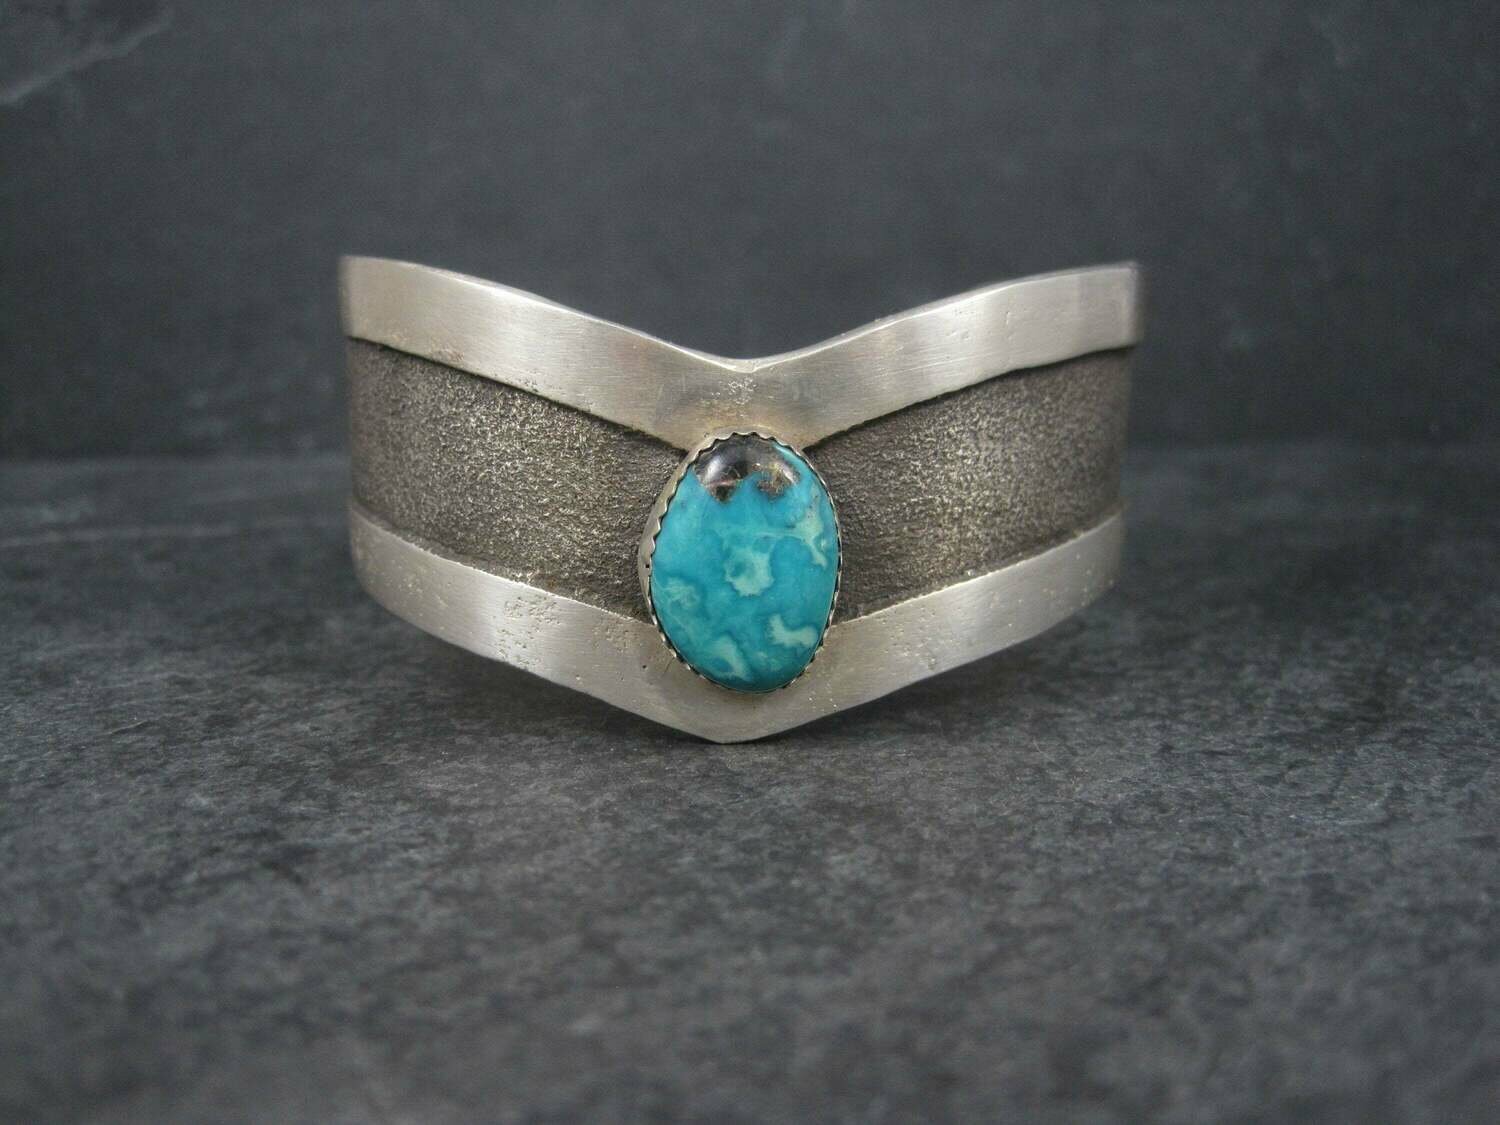 Vintage Navajo Sterling Tufa Turquoise Cuff Bracelet 6.75 Inches